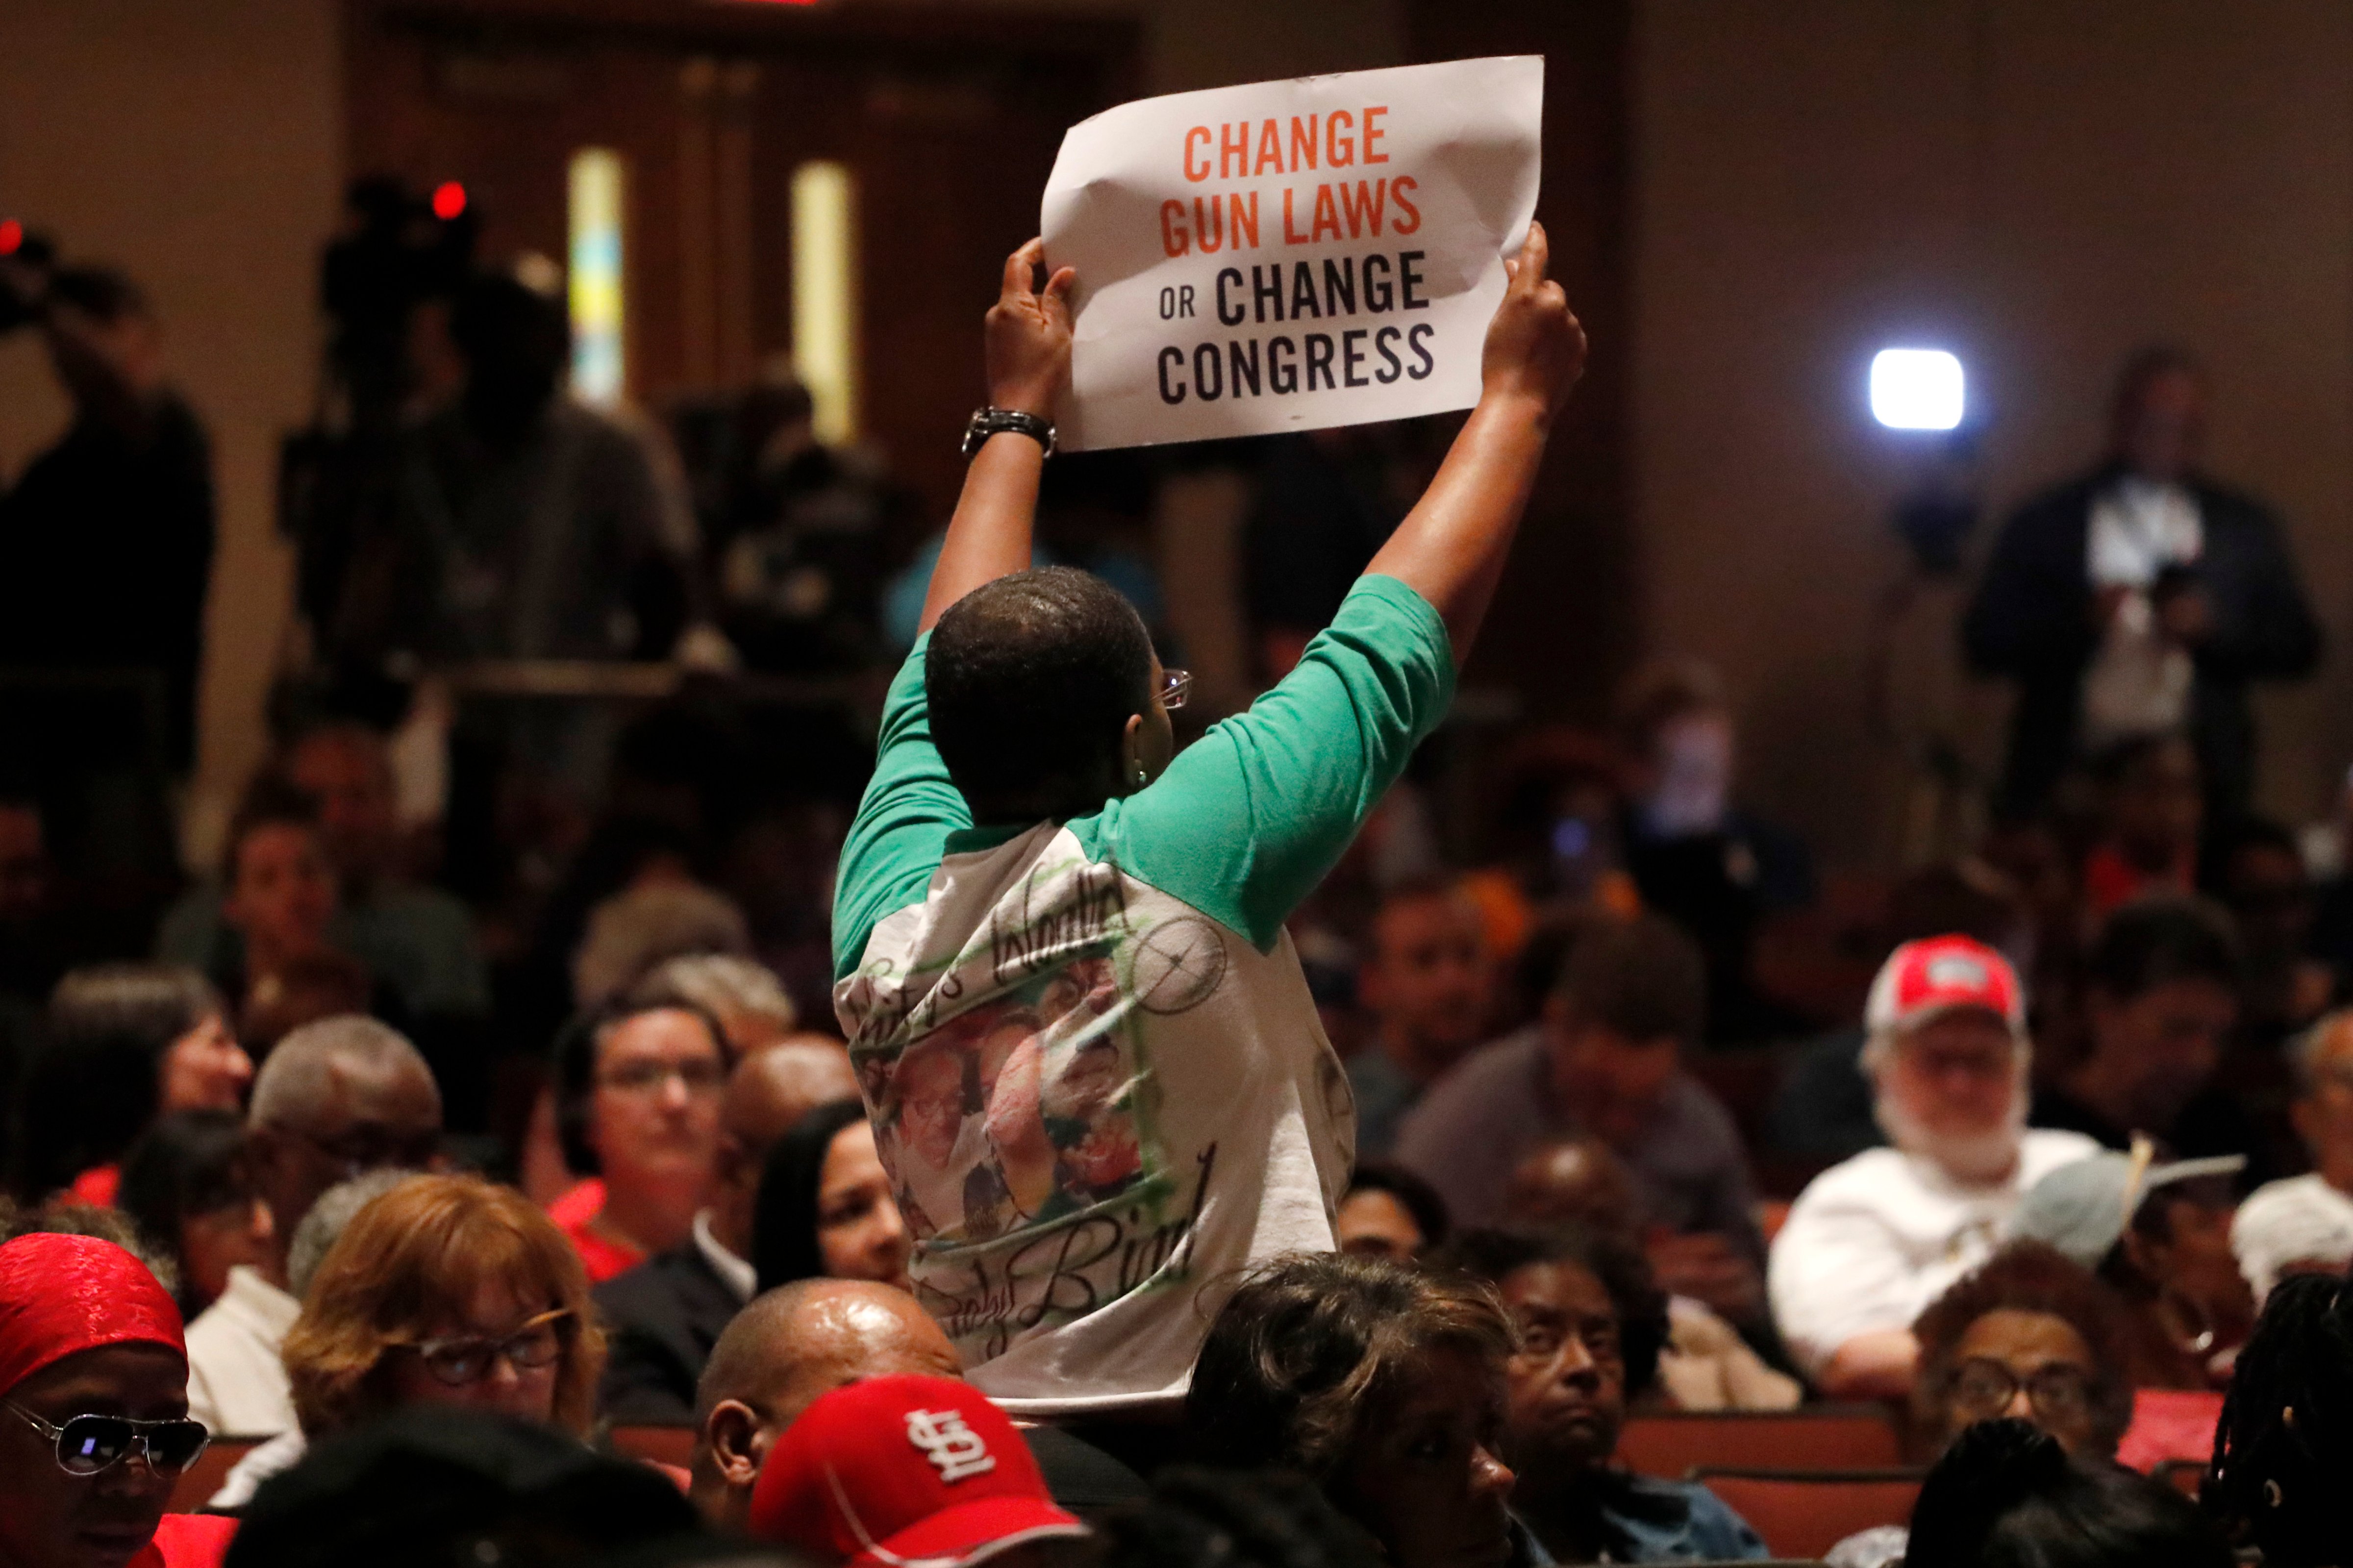 In this Wednesday, Aug. 28, 2019 photo, Erica Jones holds up a sign during a town hall to discuss the epidemic of gun violence and shocking number of children killed this summer in St. Louis. Jones, whose adult daughter was shot and killed in 2015, is like many parents desperately seeking a way to curb the gun violence that has killed at least a dozen children in the high-crime city already this year. (AP Photo/Jeff Roberson) (Jeff Roberson—AP)